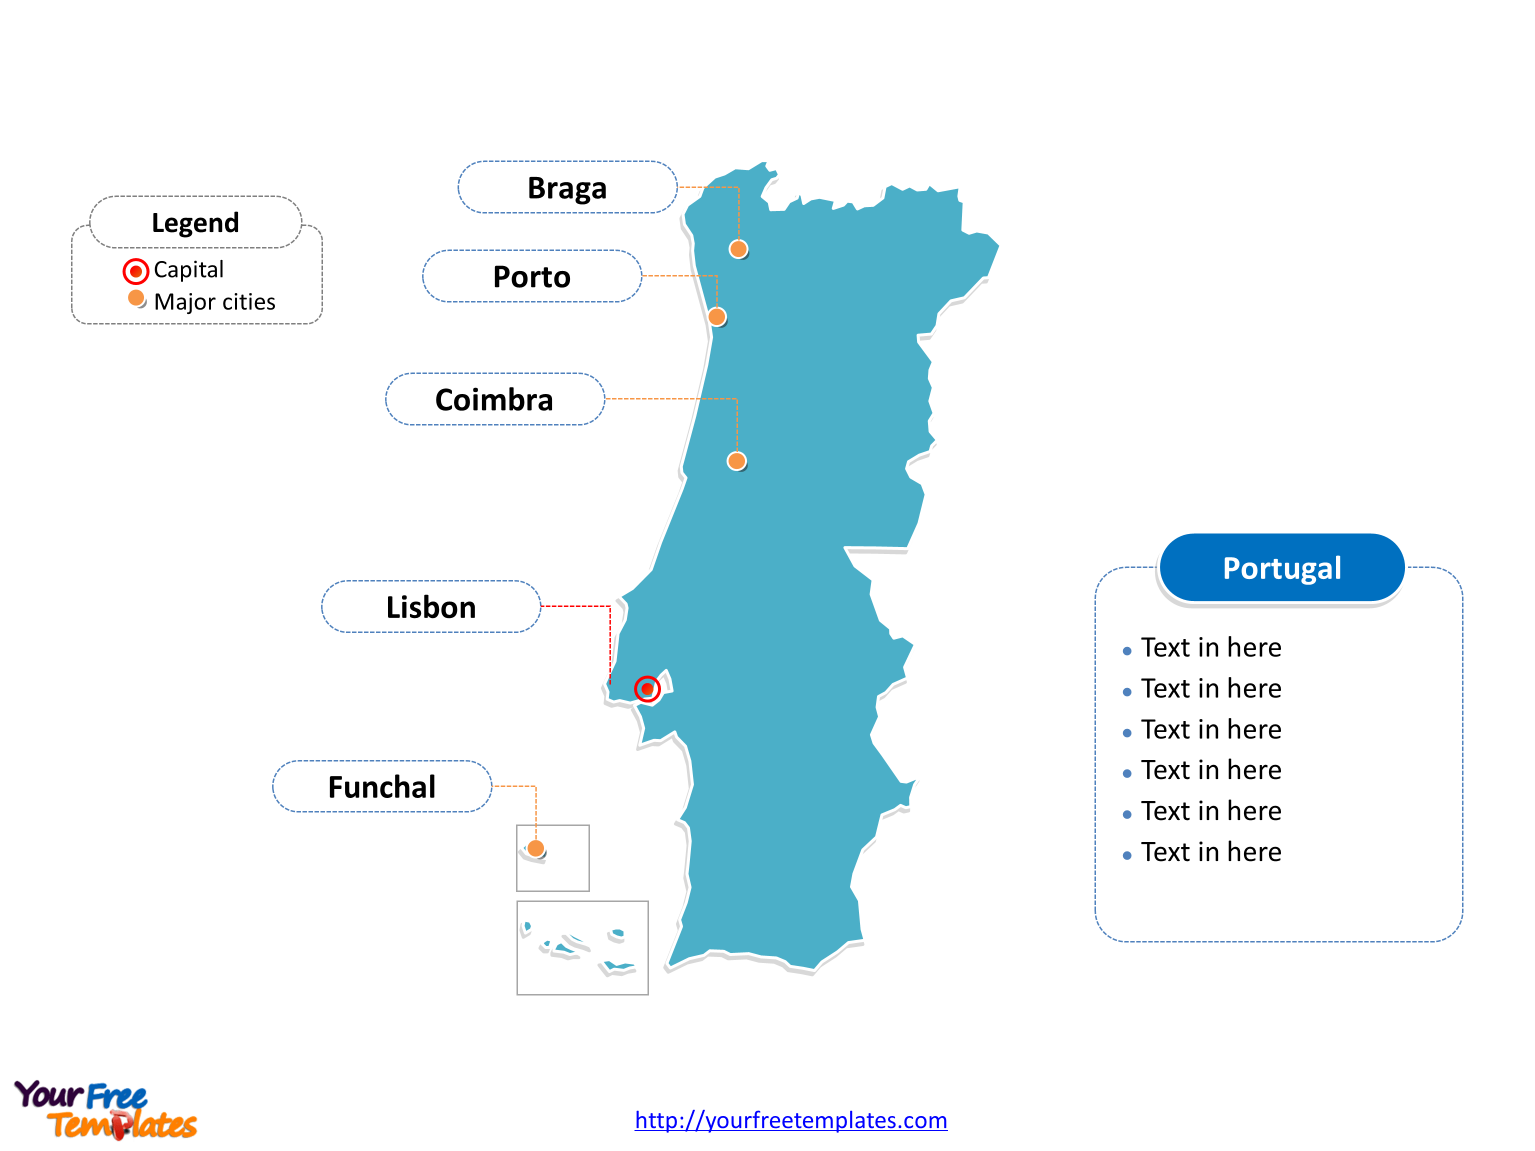 Portugal Outline map labeled with cities